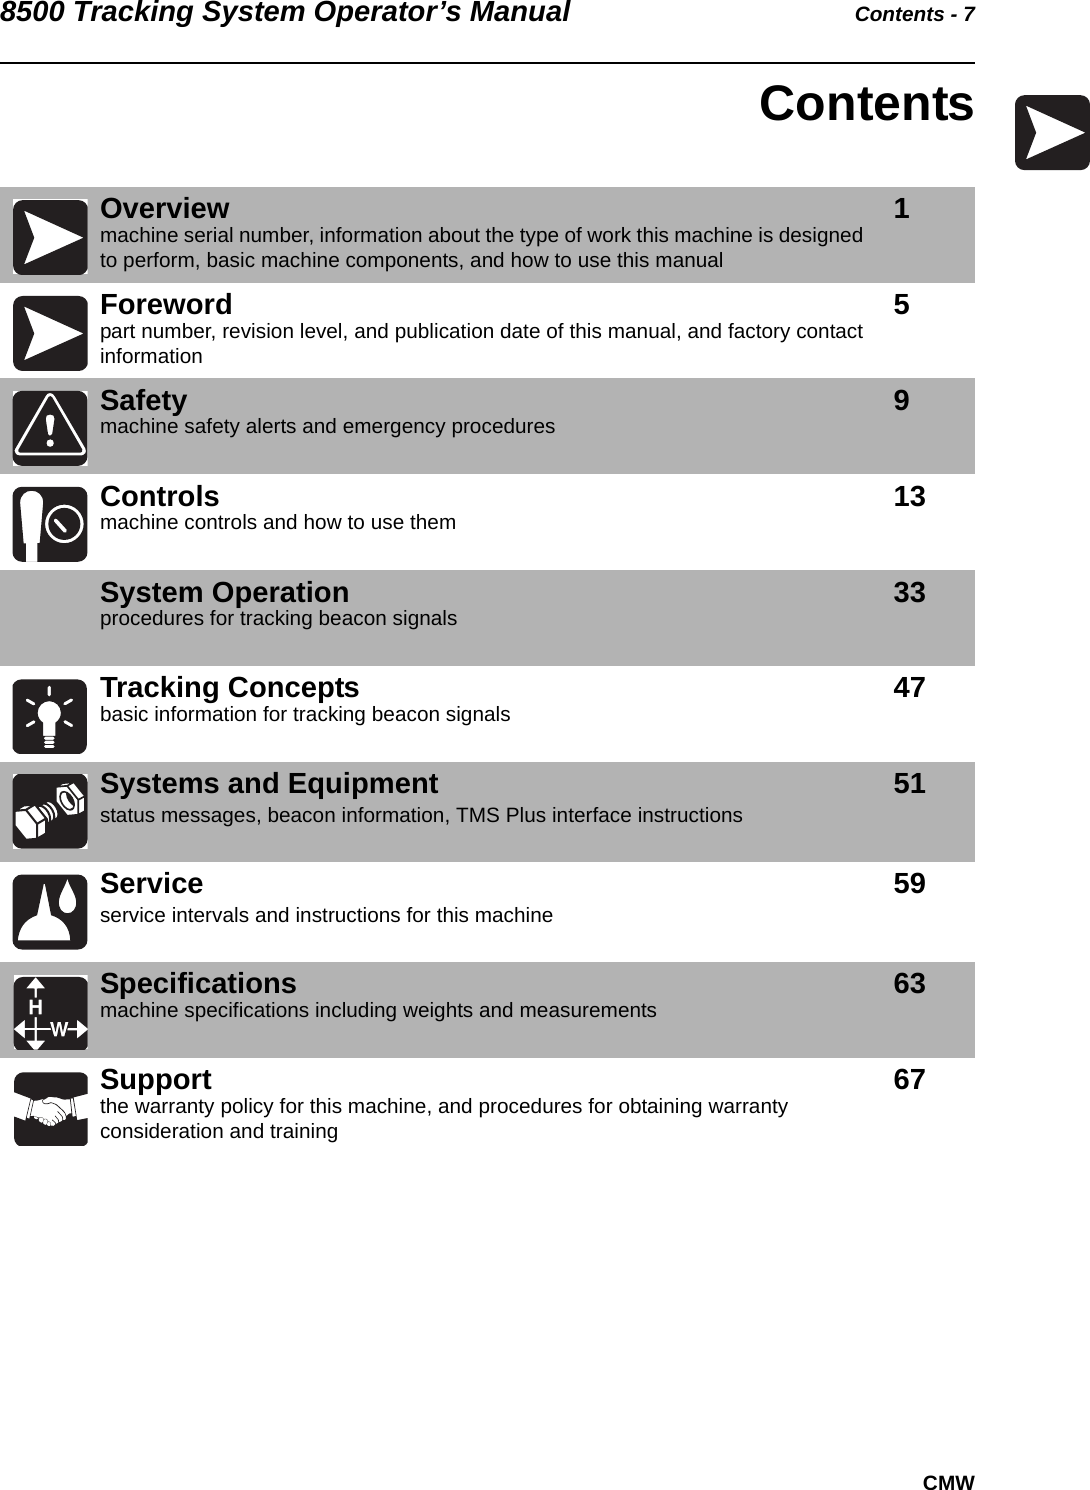 8500 Tracking System Operator’s Manual Contents - 7CMWContentsOverviewmachine serial number, information about the type of work this machine is designed to perform, basic machine components, and how to use this manual1Forewordpart number, revision level, and publication date of this manual, and factory contact information5Safetymachine safety alerts and emergency procedures 9Controlsmachine controls and how to use them 13System Operation procedures for tracking beacon signals 33Tracking Conceptsbasic information for tracking beacon signals 47Systems and Equipment status messages, beacon information, TMS Plus interface instructions51Serviceservice intervals and instructions for this machine59Specificationsmachine specifications including weights and measurements 63Supportthe warranty policy for this machine, and procedures for obtaining warranty consideration and training67